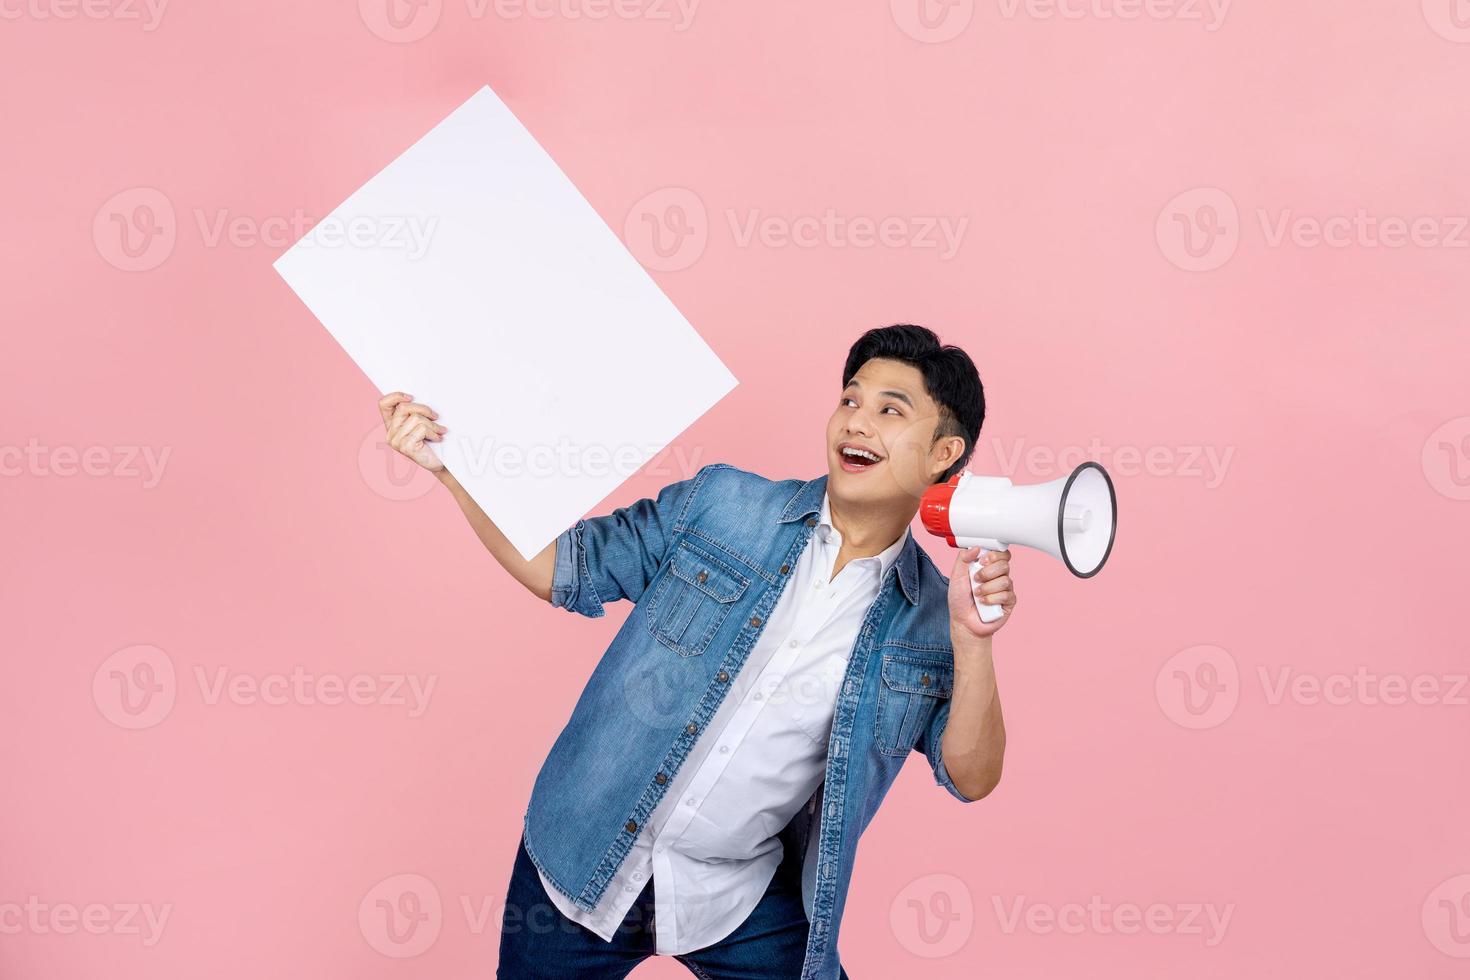 Smiling happy Asian man shouting announce into megaphone and holding blank speech bubbles on pink background. photo